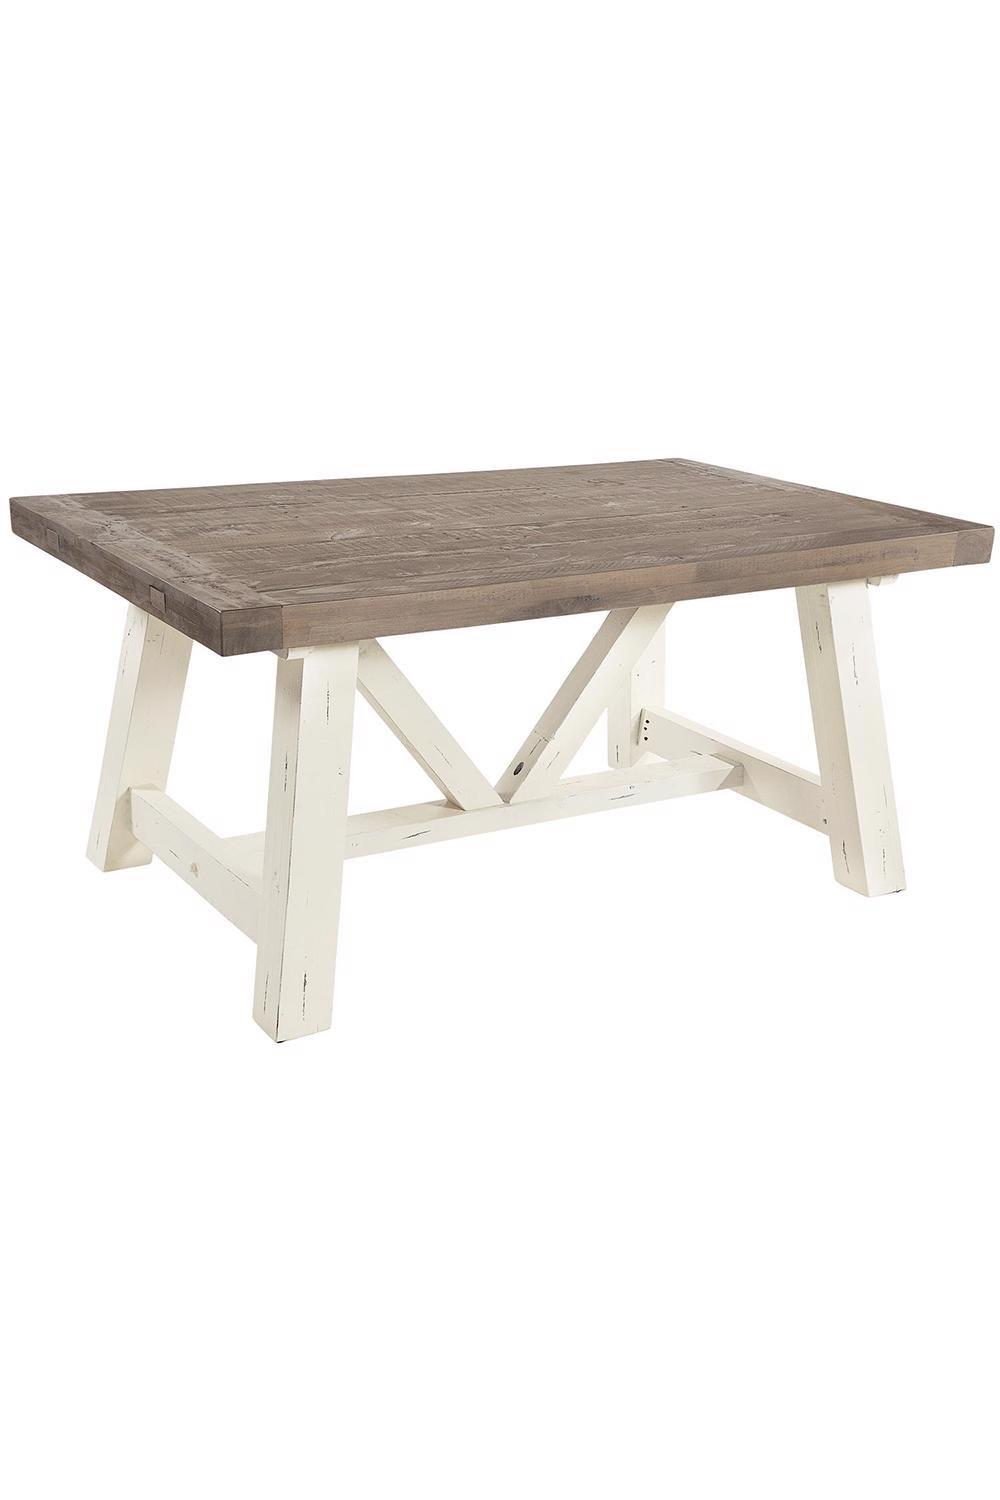 1.6M Fixed Top Solid Reclaimed Pine Cream Dining Table